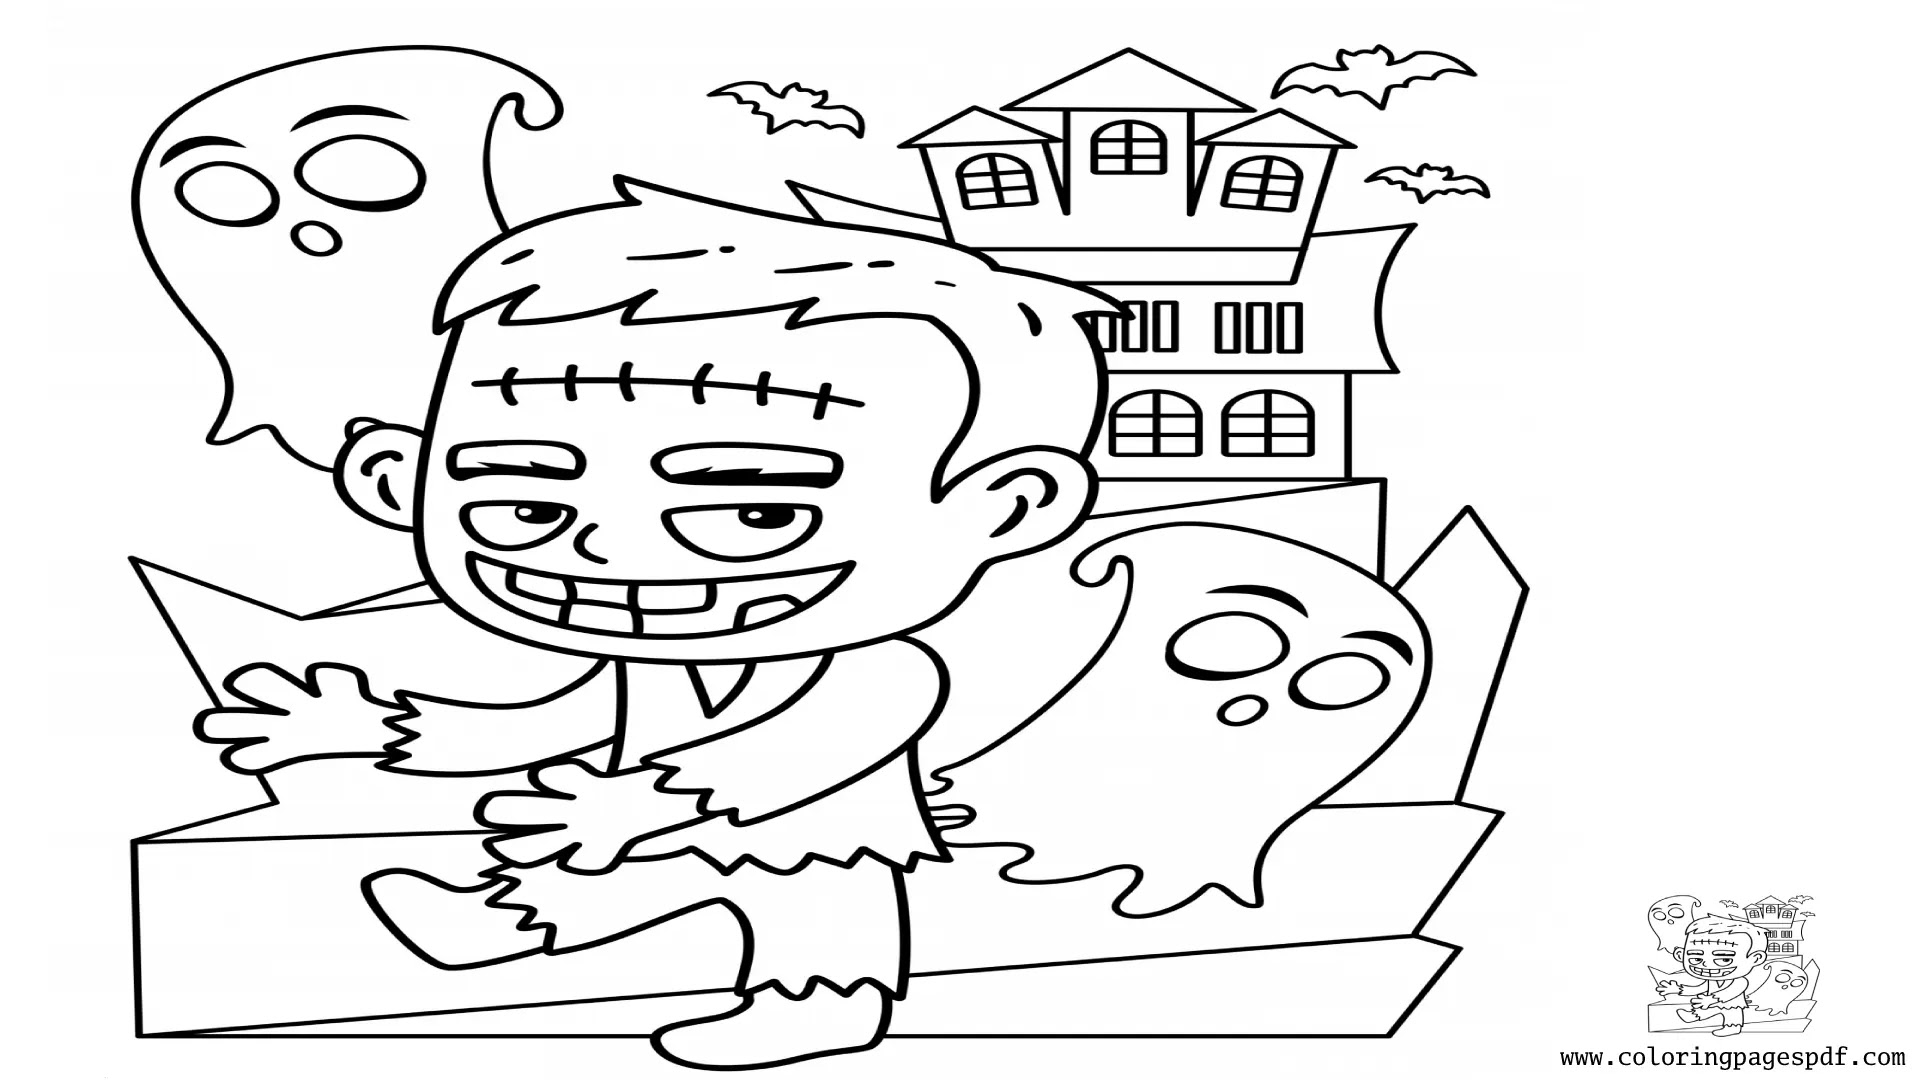 Coloring Page Of Frankenstein With Ghosts